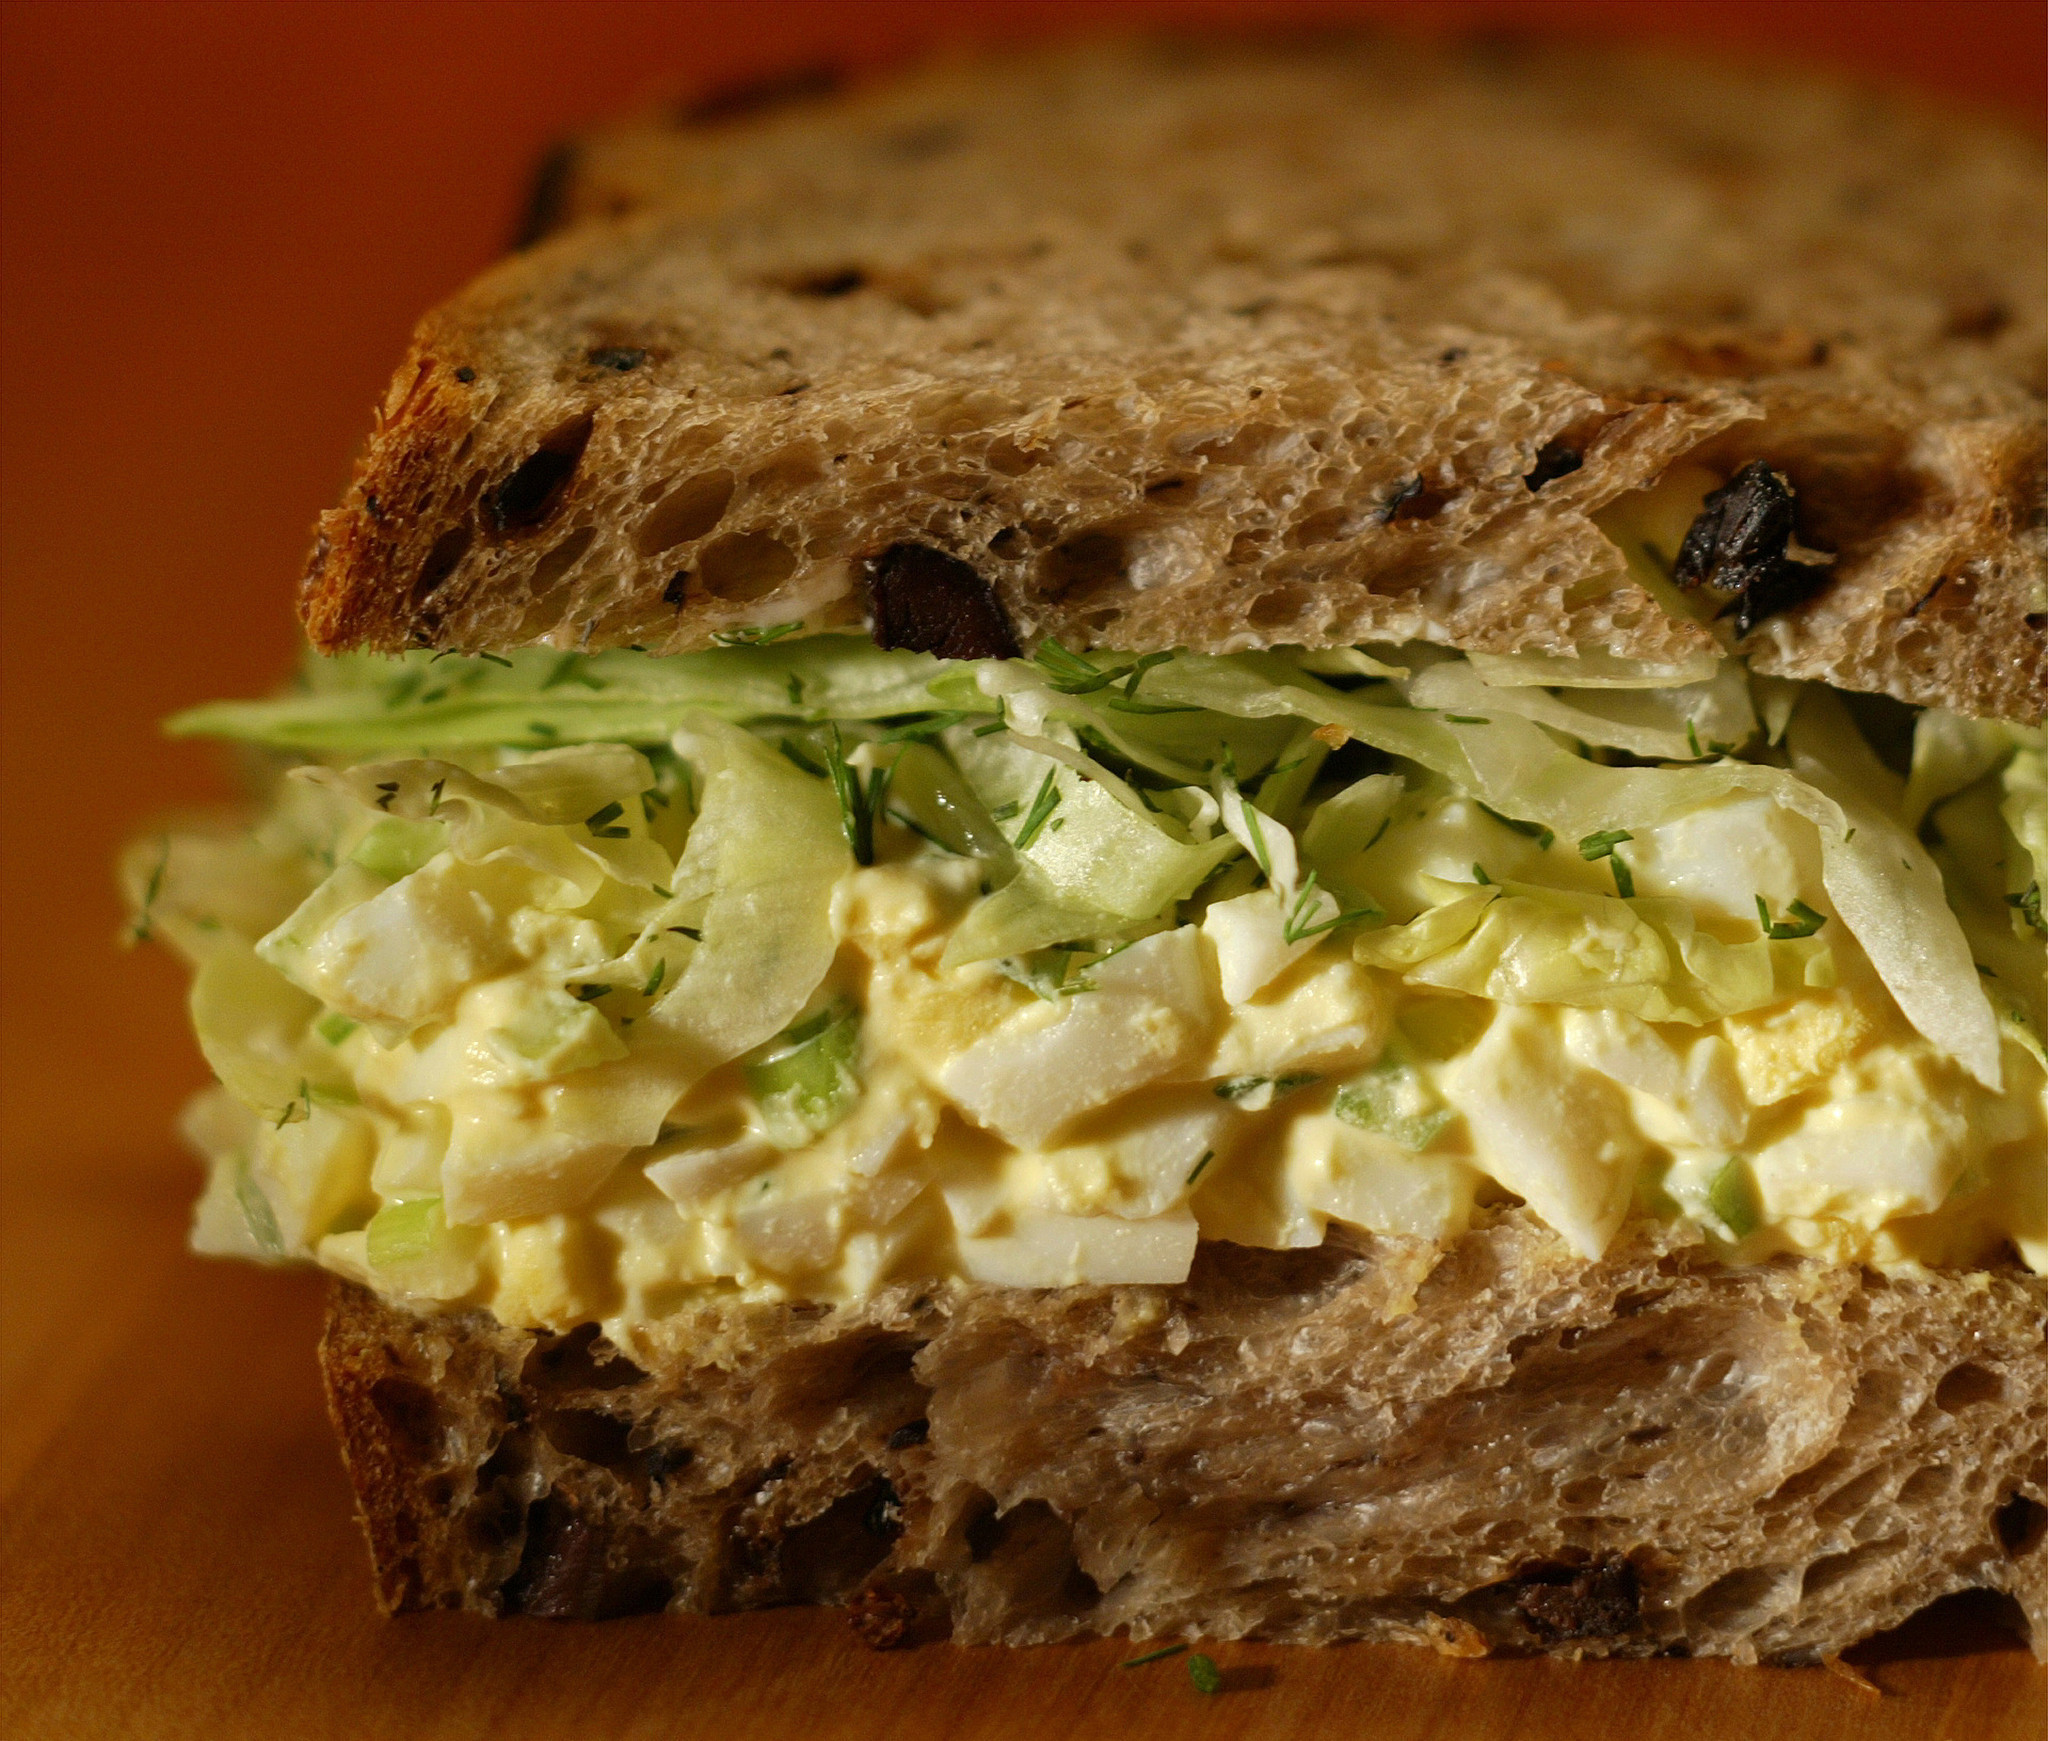 Sandwich Ideas For Dinner
 Easy dinner recipes Egg salad and more sandwiches in 30